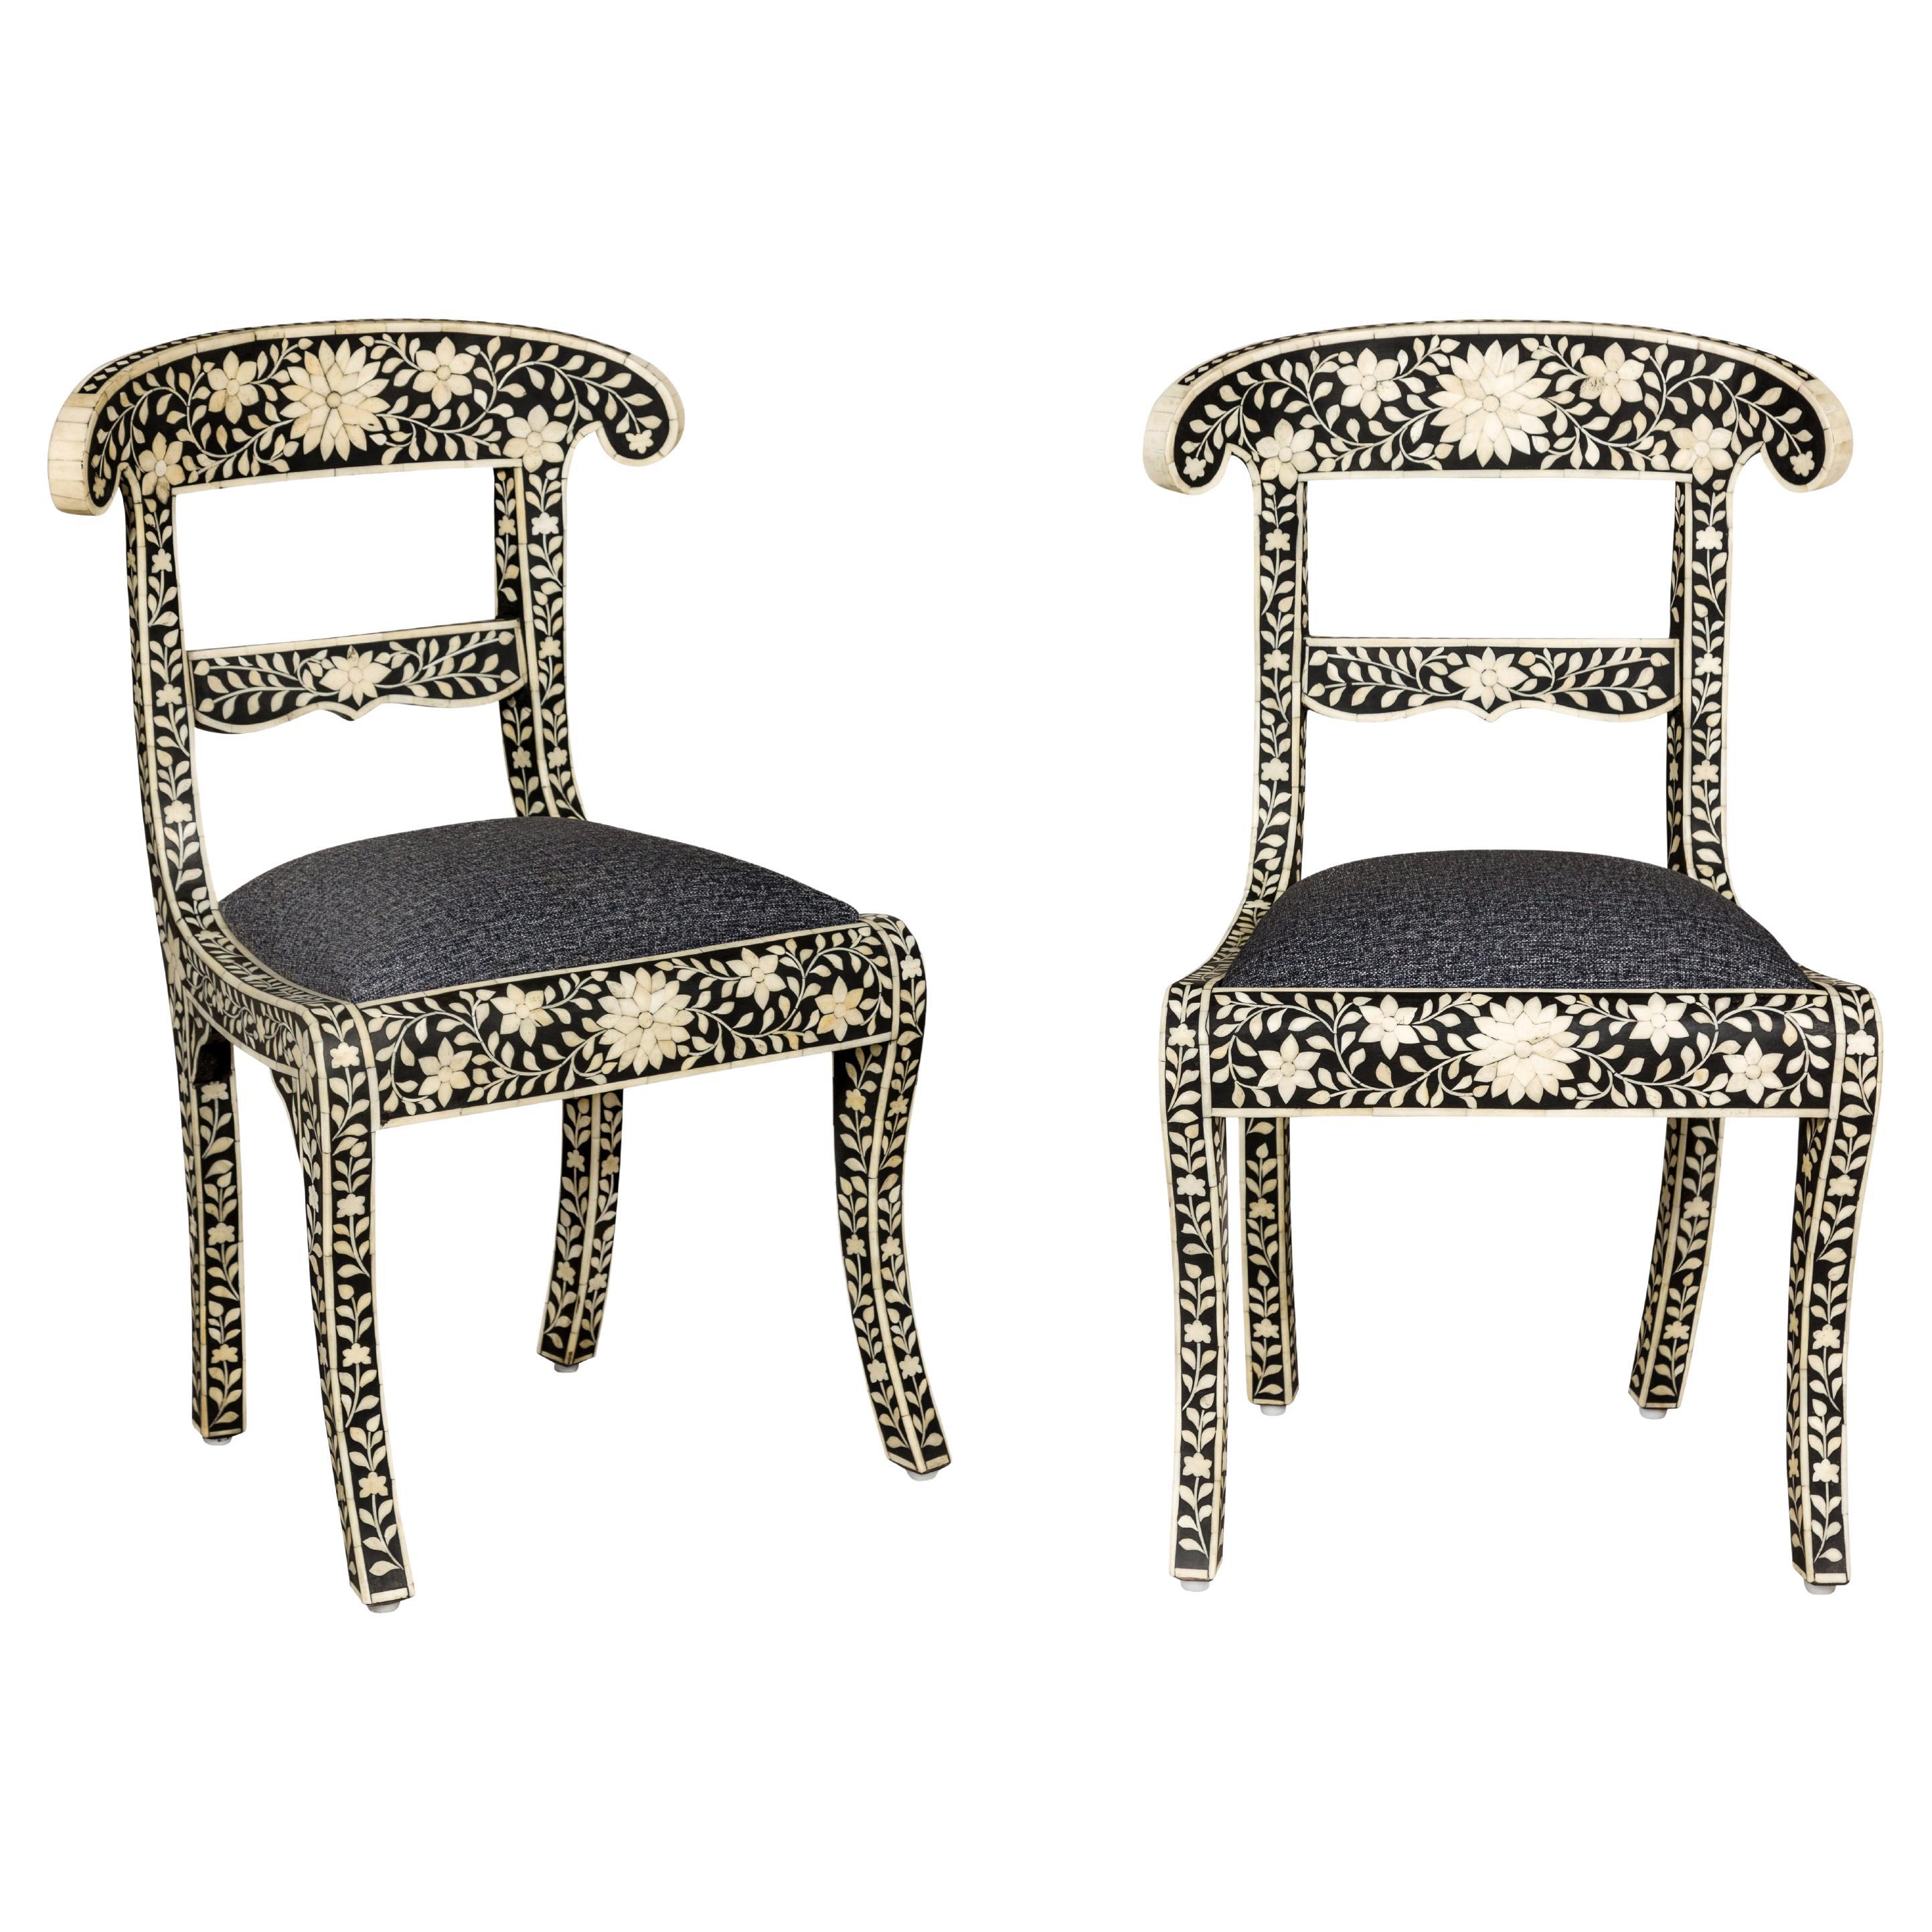 Anglo-Indian Style Ebonized Side Chairs with Floral Themed Bone Inlay, a Pair